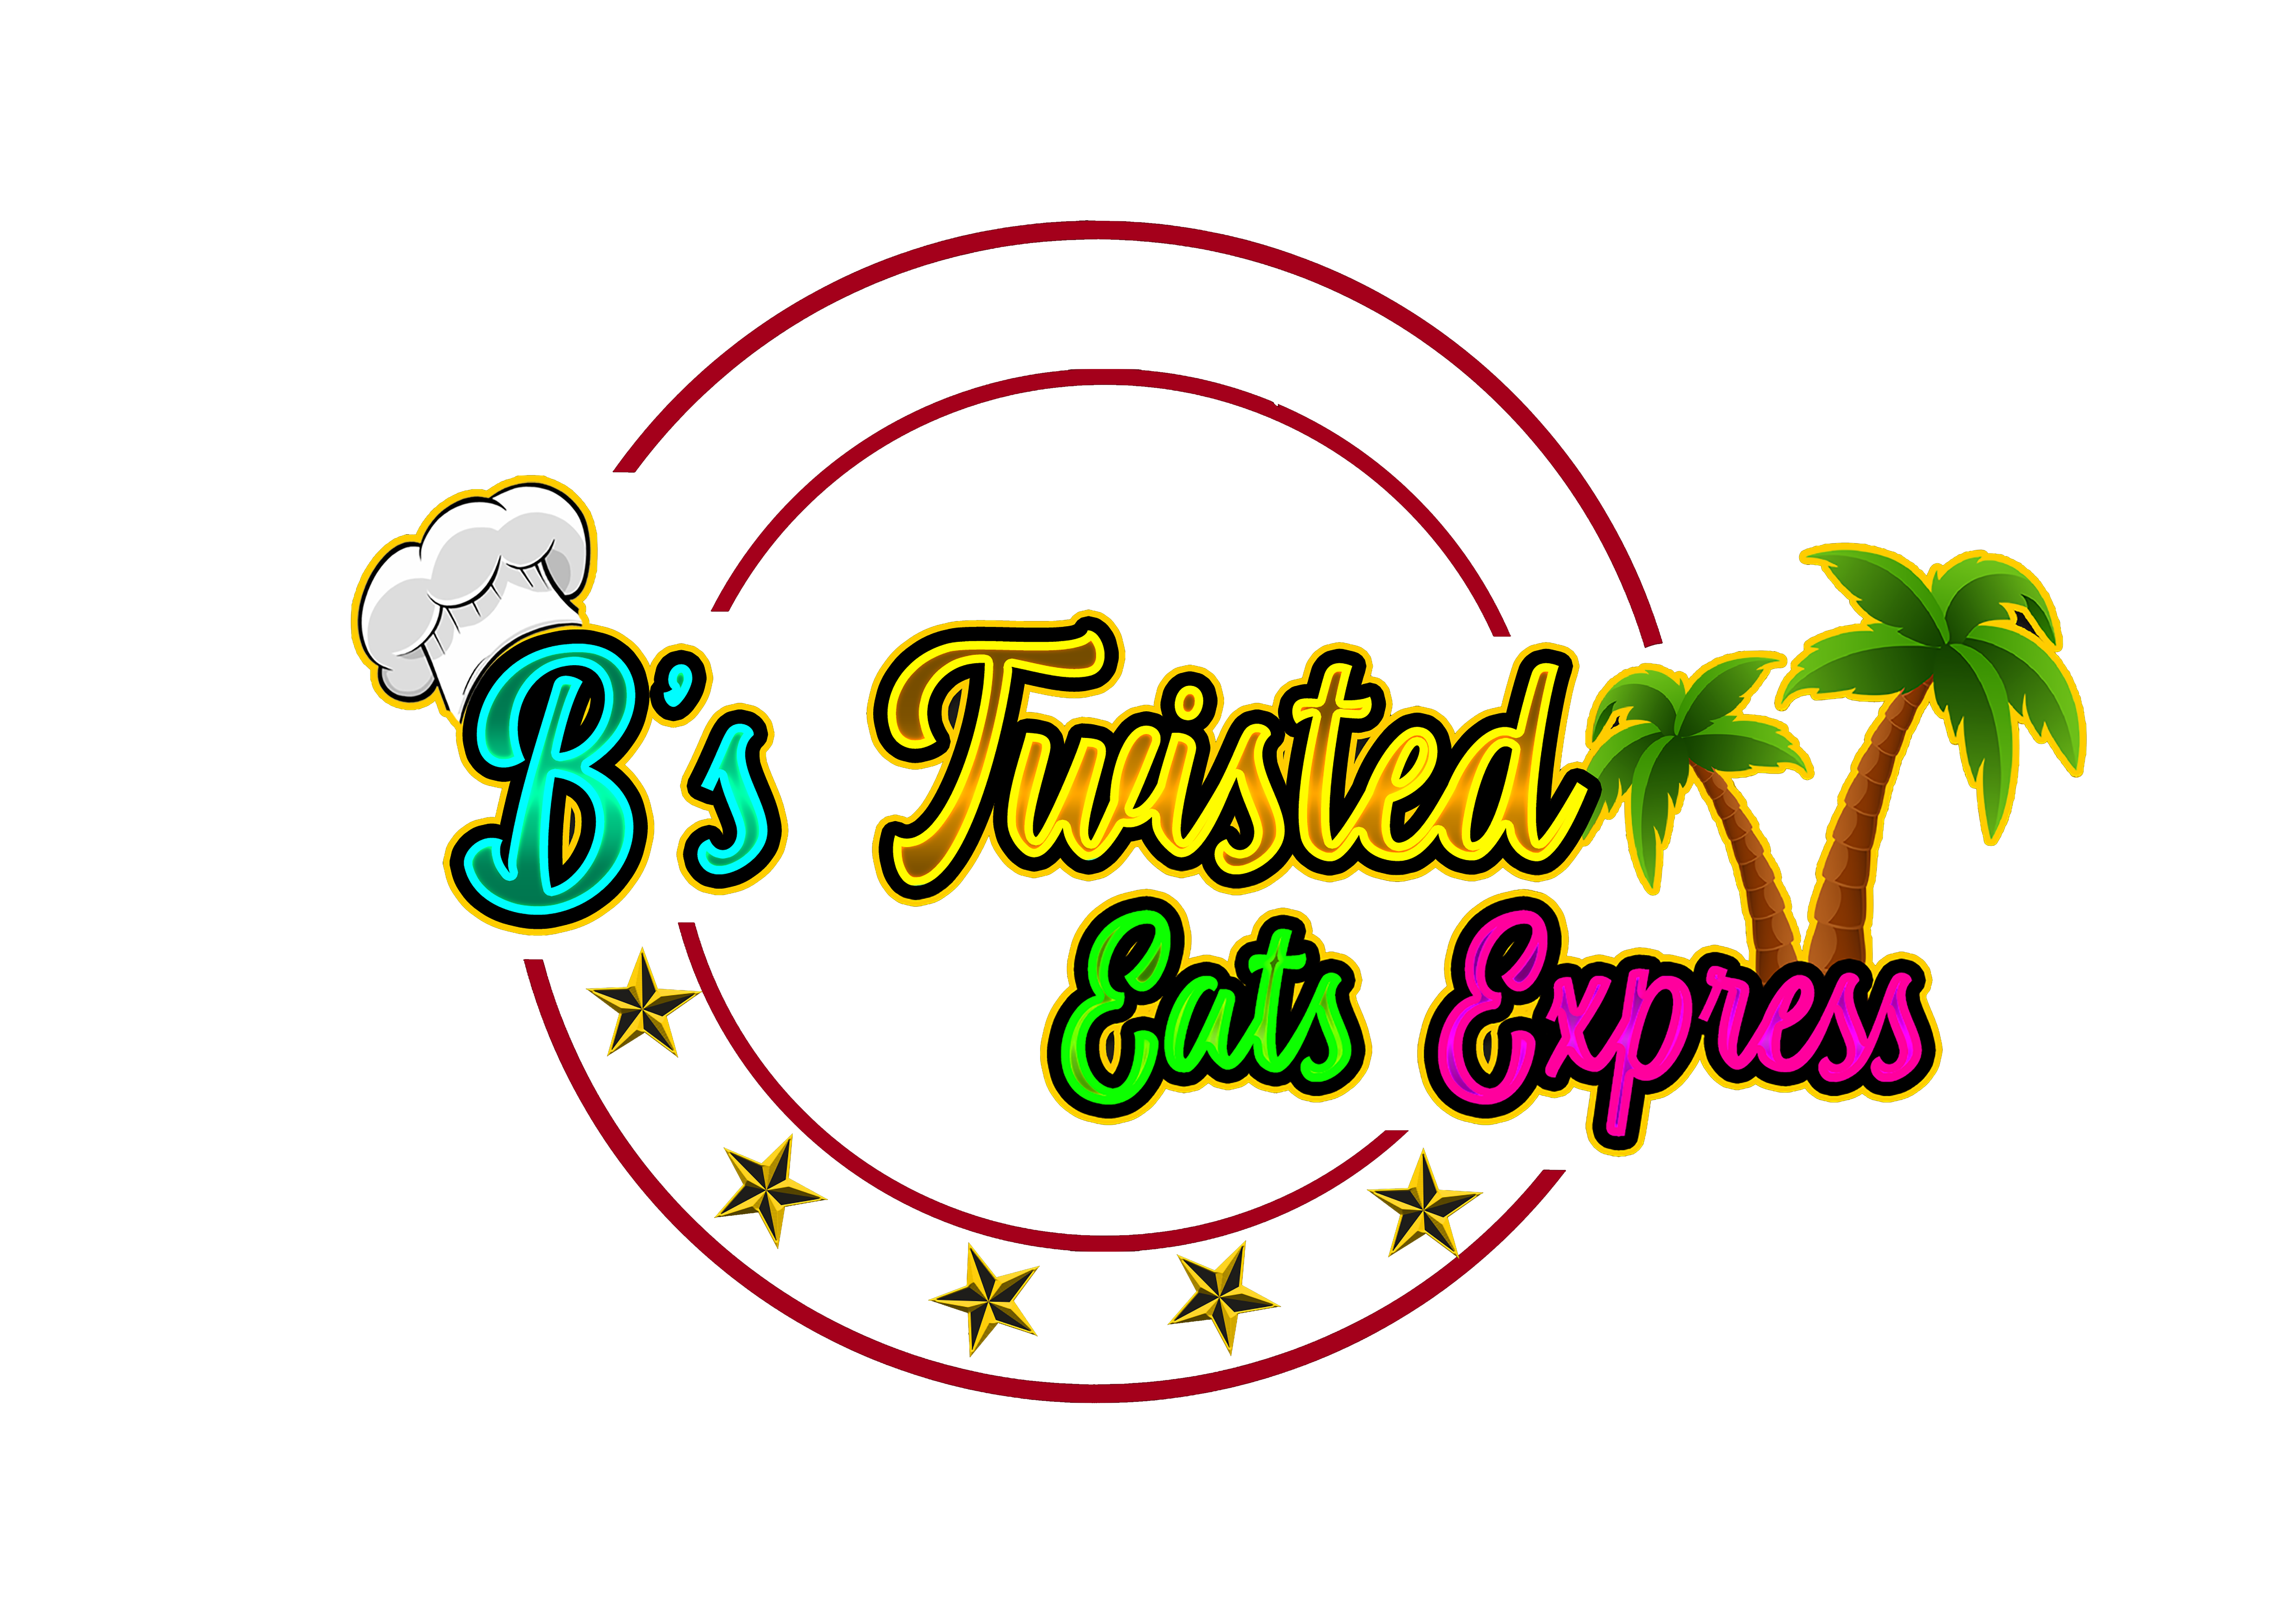 B's Twisted Eats Express